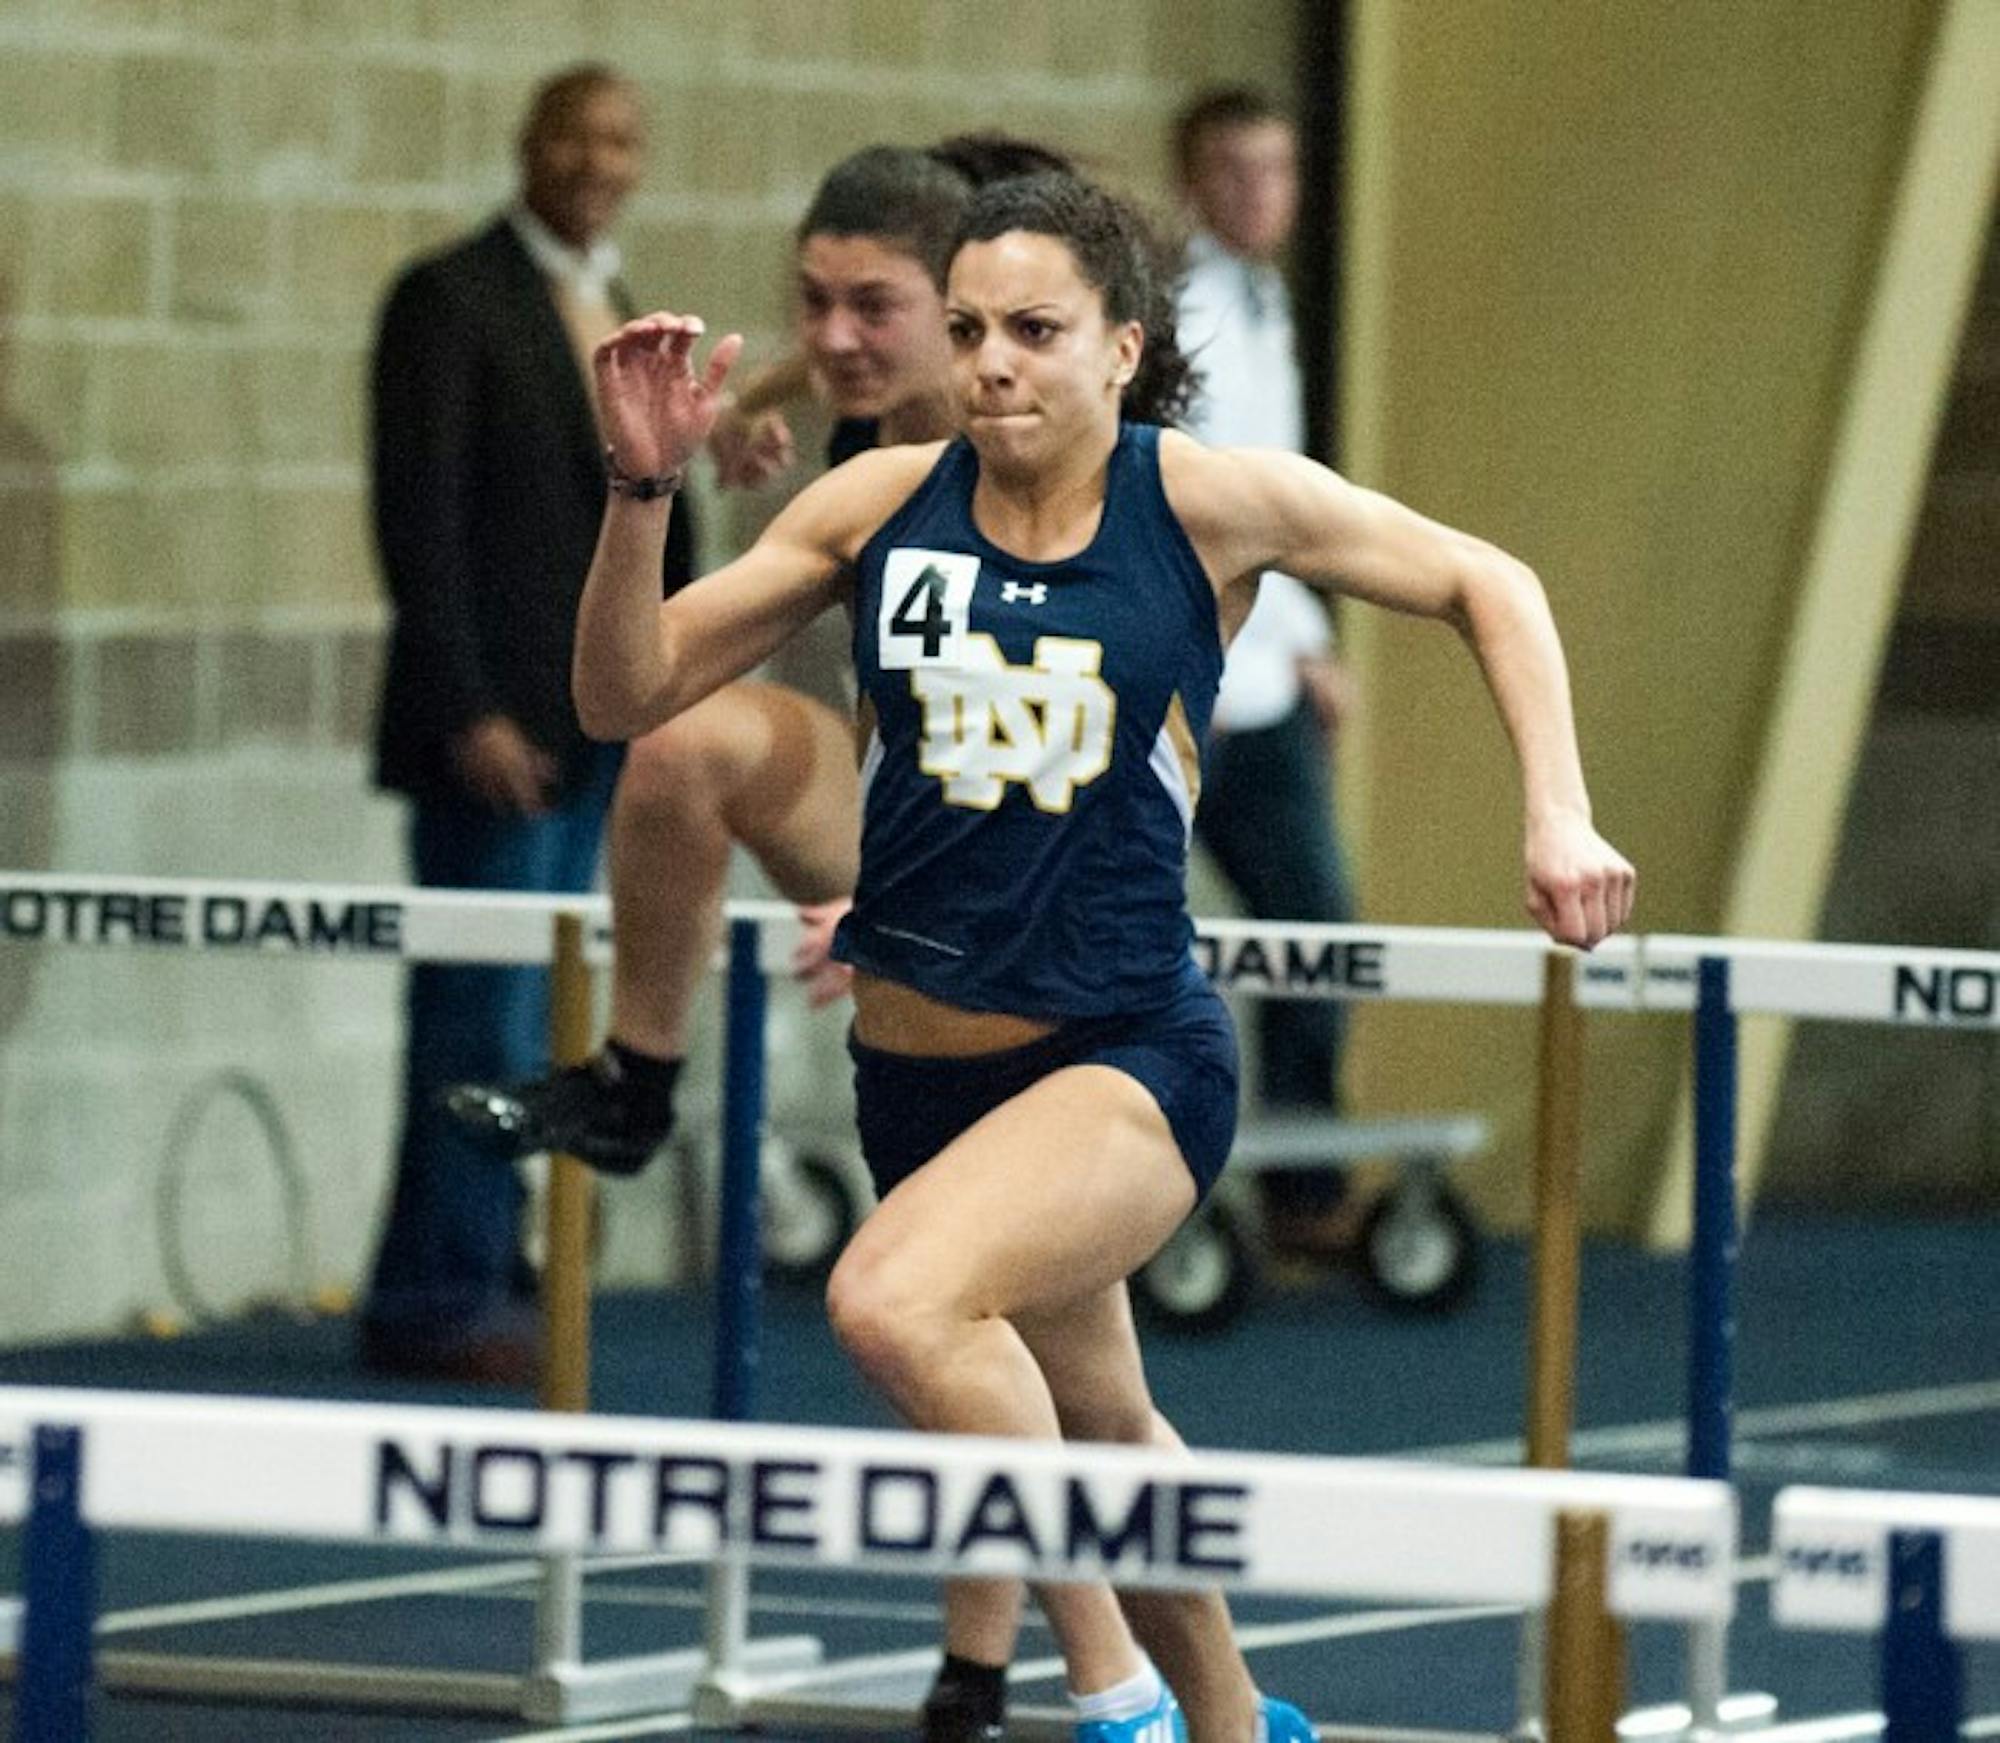 Senior Jade Barber competes Feb. 6 at the Meyo Invitational at Meyo Field. Barber set a school record in the 100-meter hurdles Saturday with a time of 12.81 seconds.